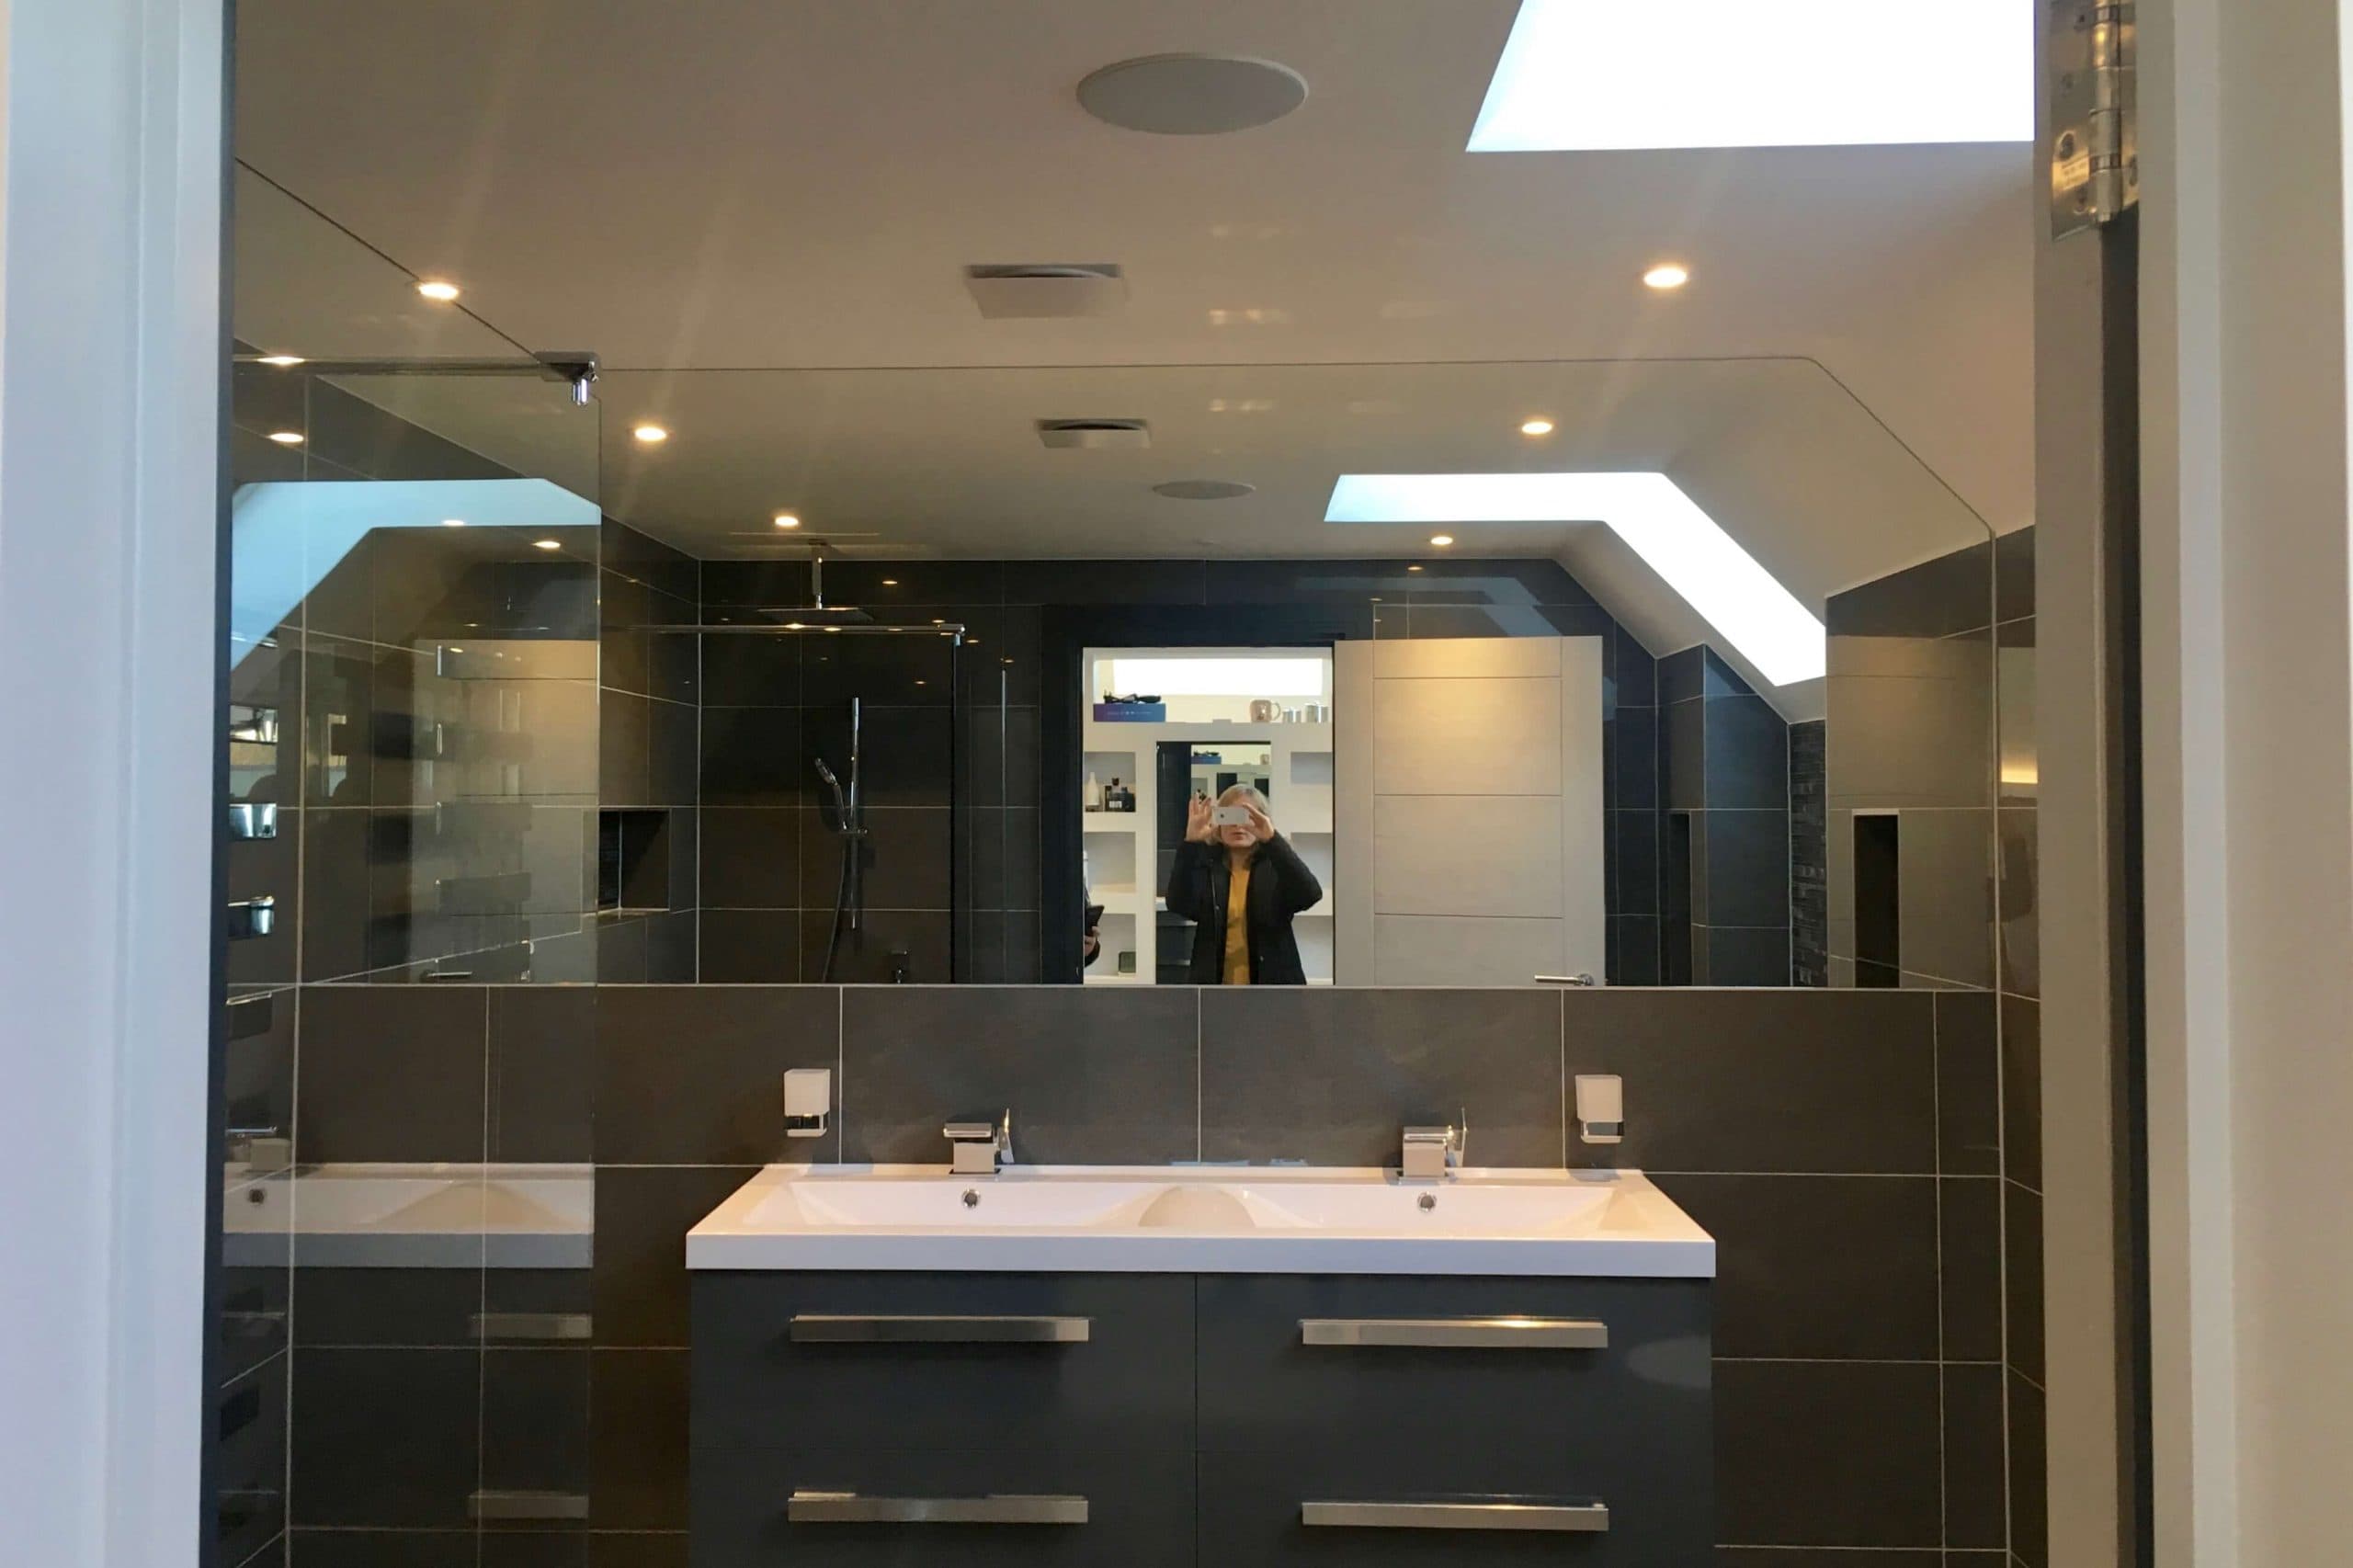 Bathroom in Scandia Hus new build with ceiling squares hidding MVHR system by SubCool FM